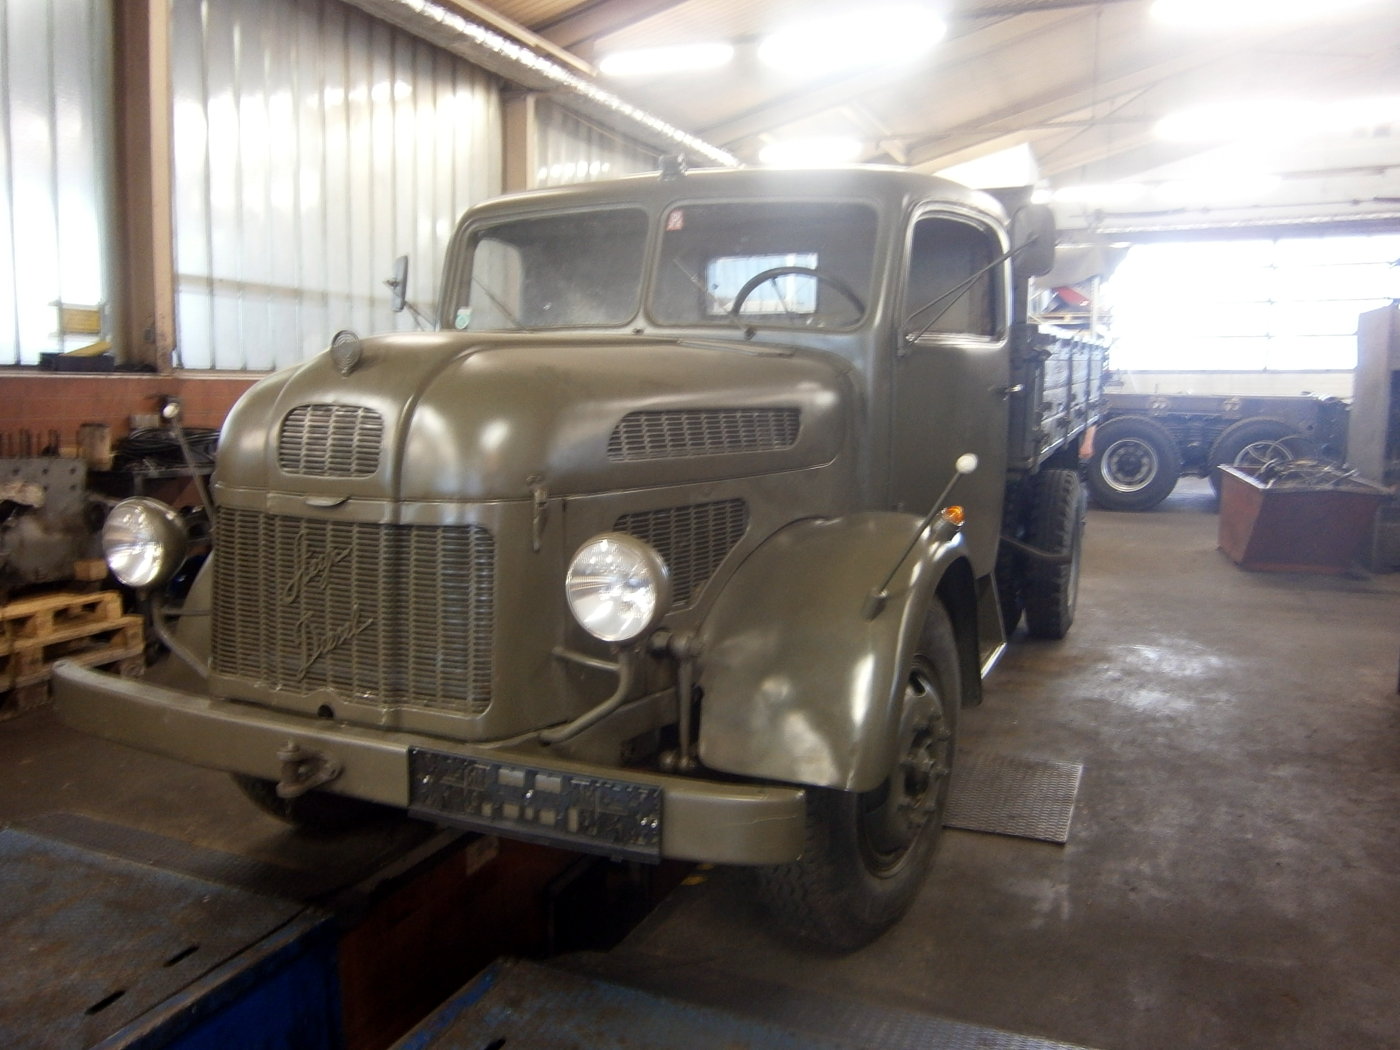 Steyr Type 380 after successfully receiving new engine transplant